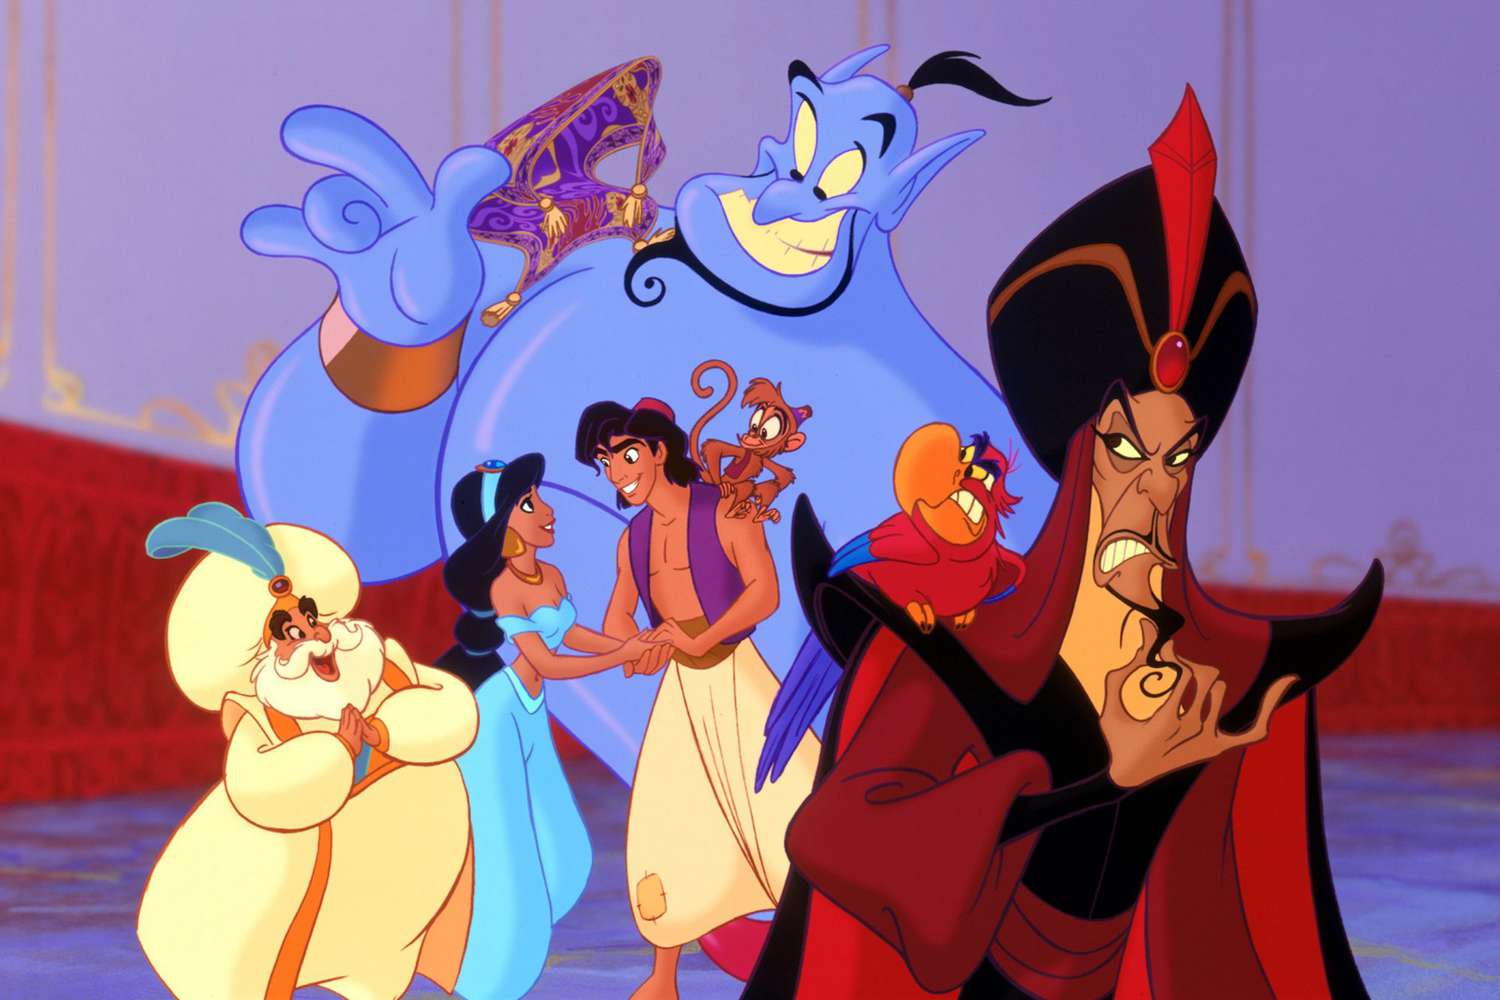 Aladdin: 25 interesting facts about the Disney animated film 